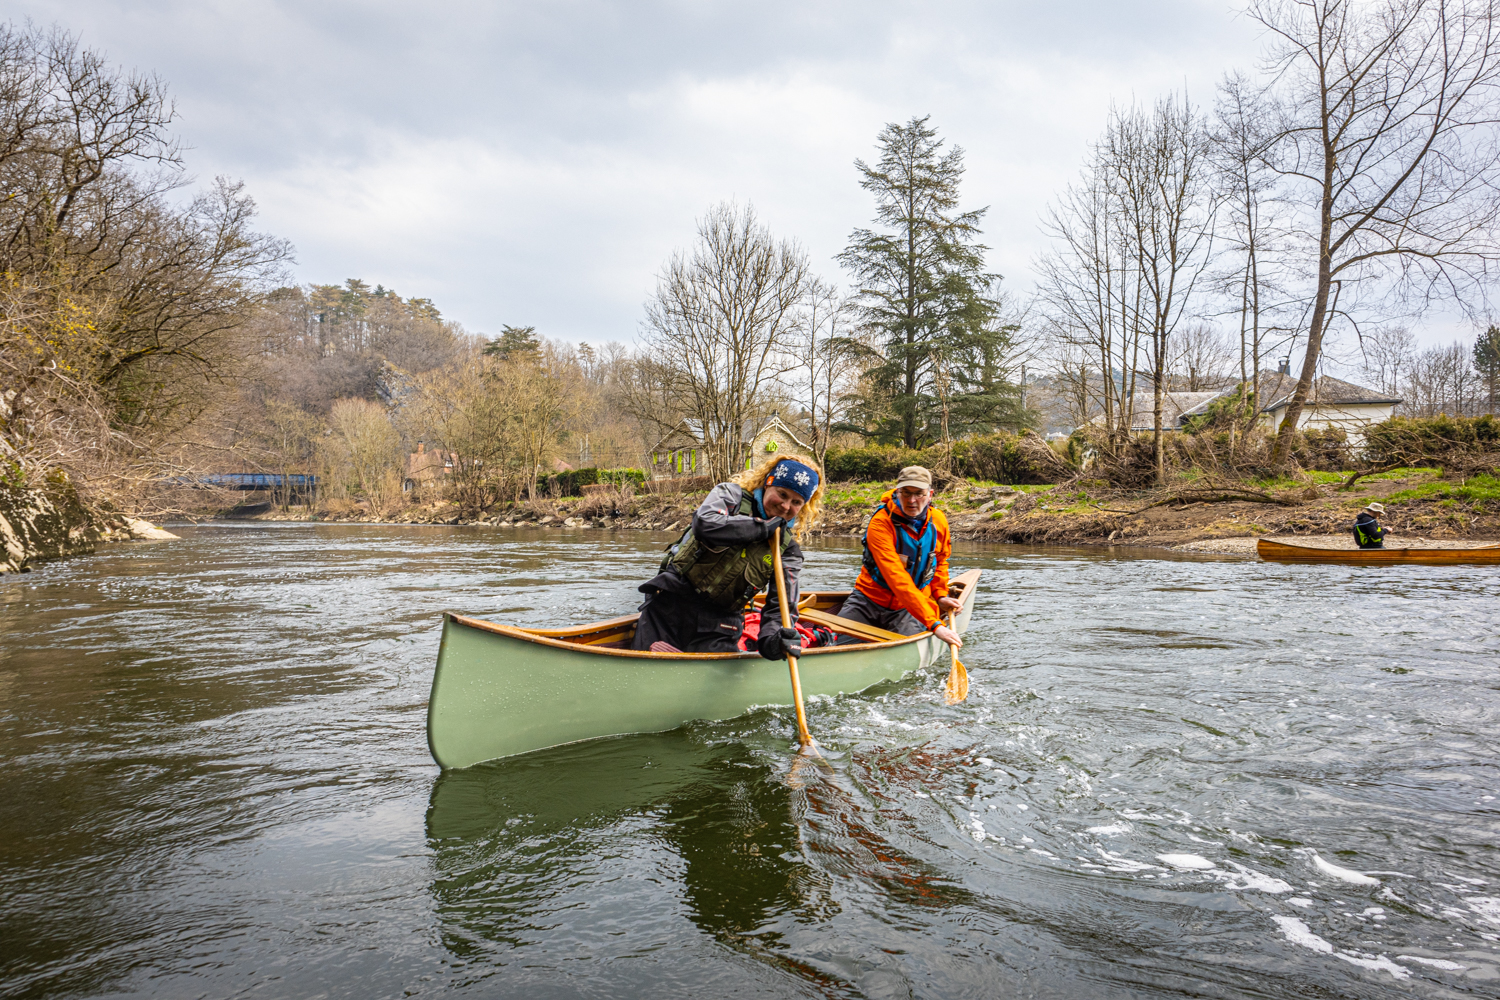 Advanced tandem canoeing - Moving water